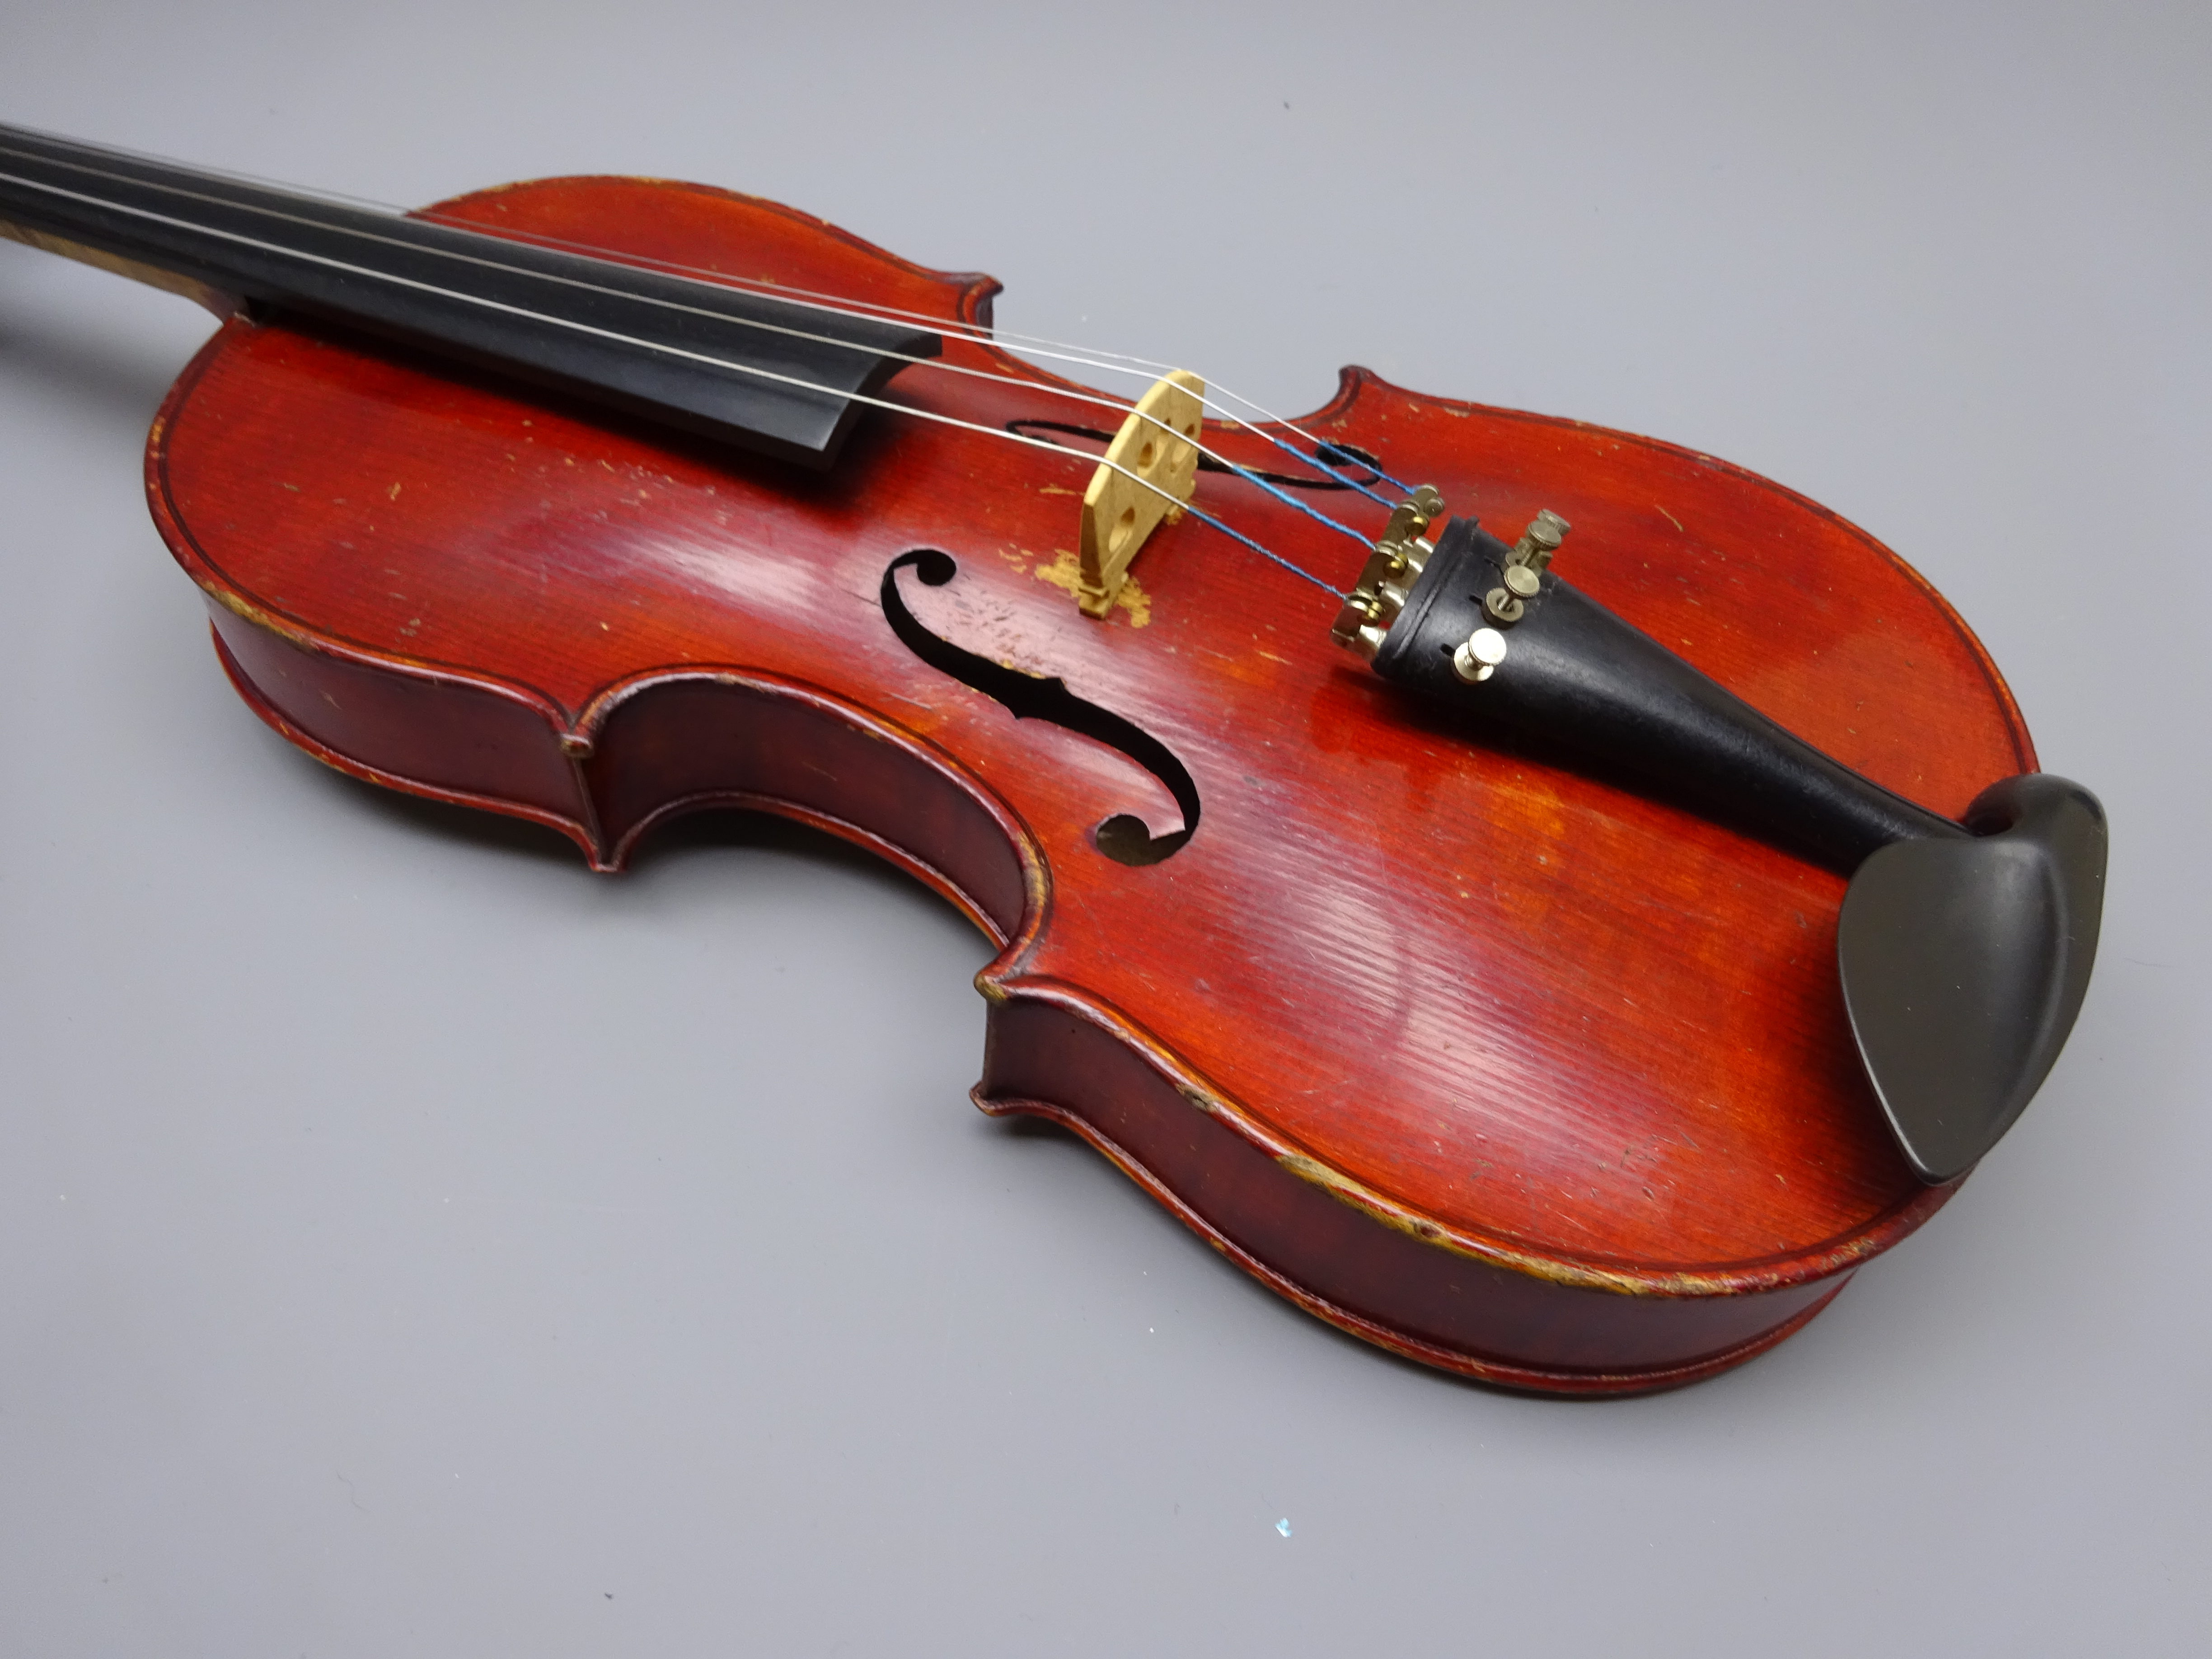 Early 20th century violin, French or German, with 36cm one-piece maple back and ribs and spruce top, - Image 8 of 9